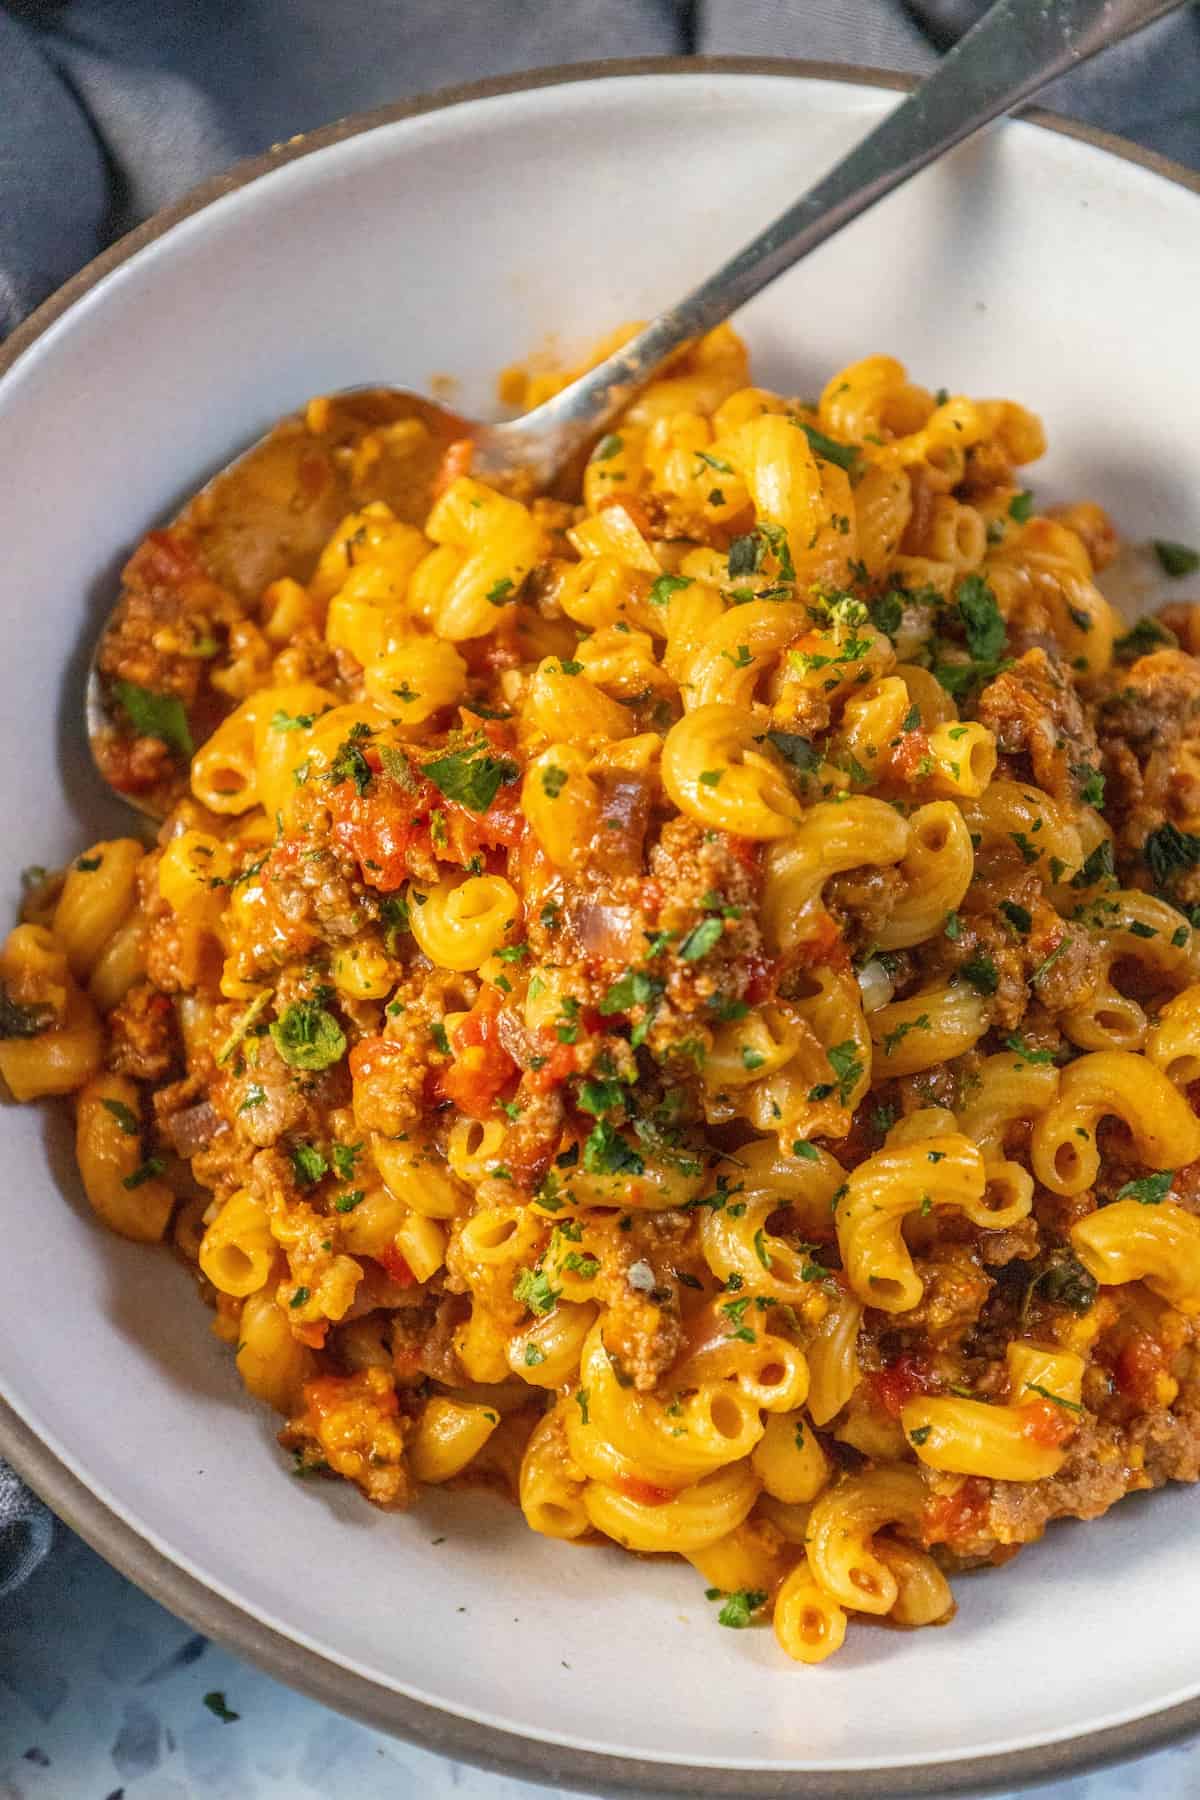 An American recipe for a flavorful bowl of pasta with meat and tomato sauce.